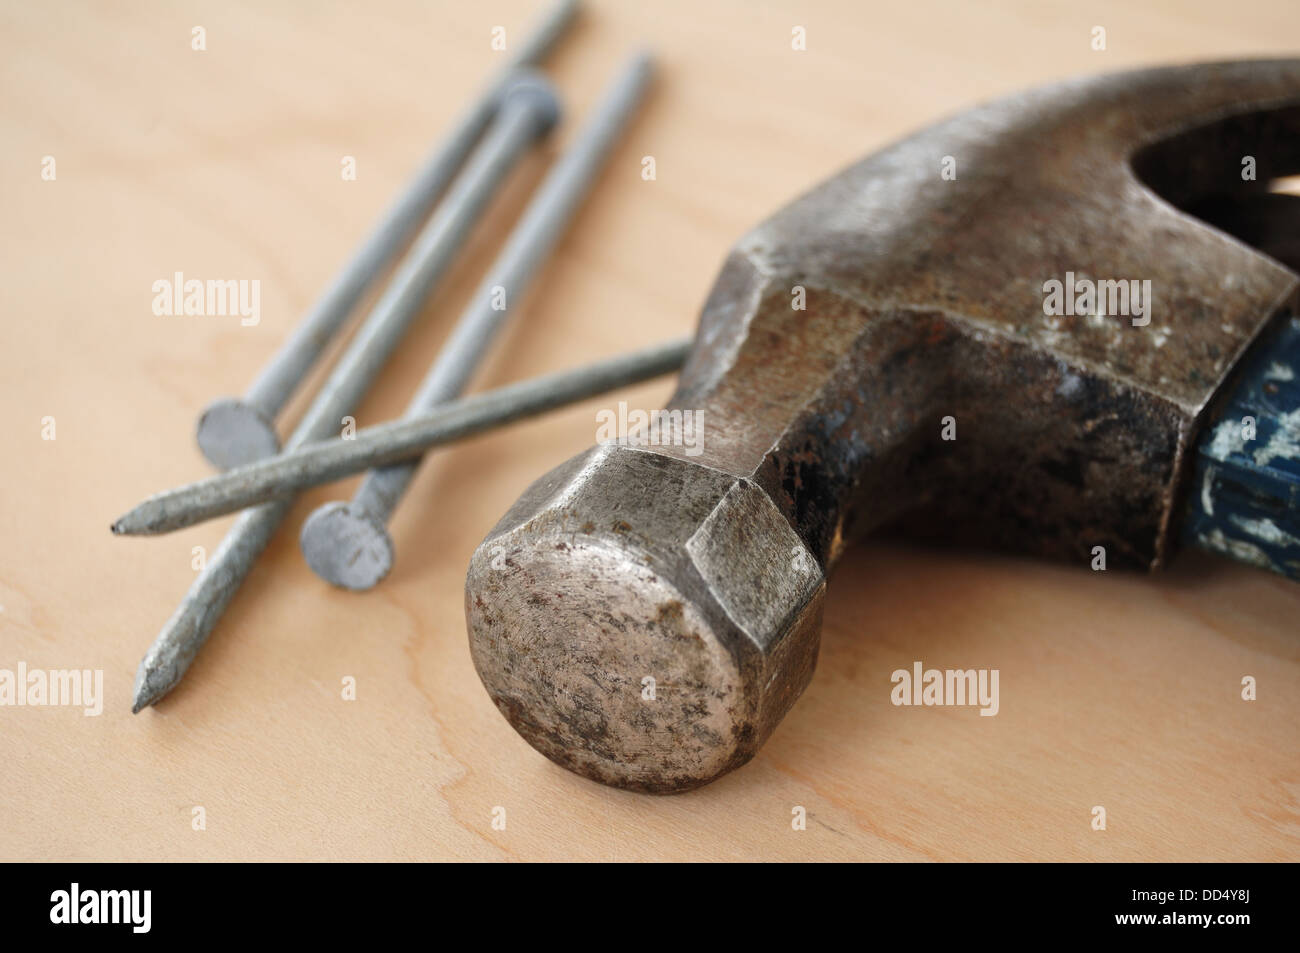 Galvanized Nails and a Claw Hammer Stock Photo